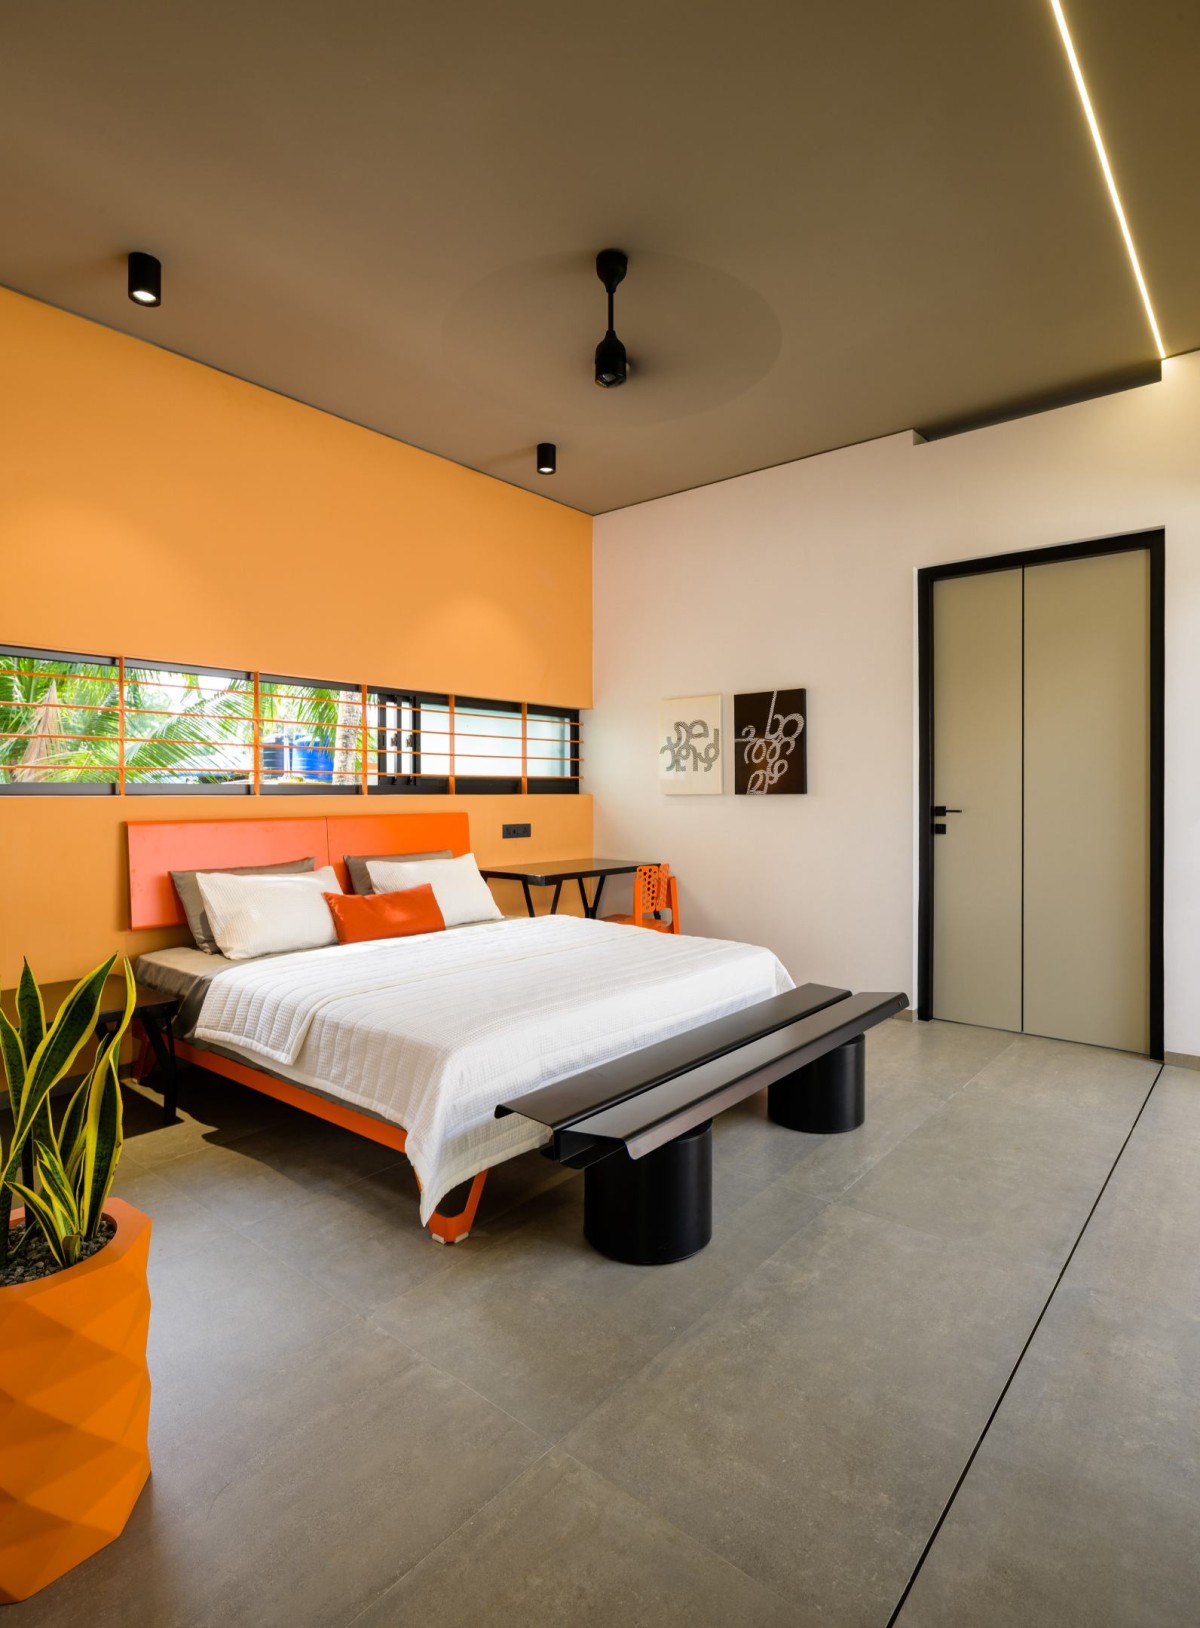 Bedroom 4 of The Colour Burst House by LIJO.RENY.architects